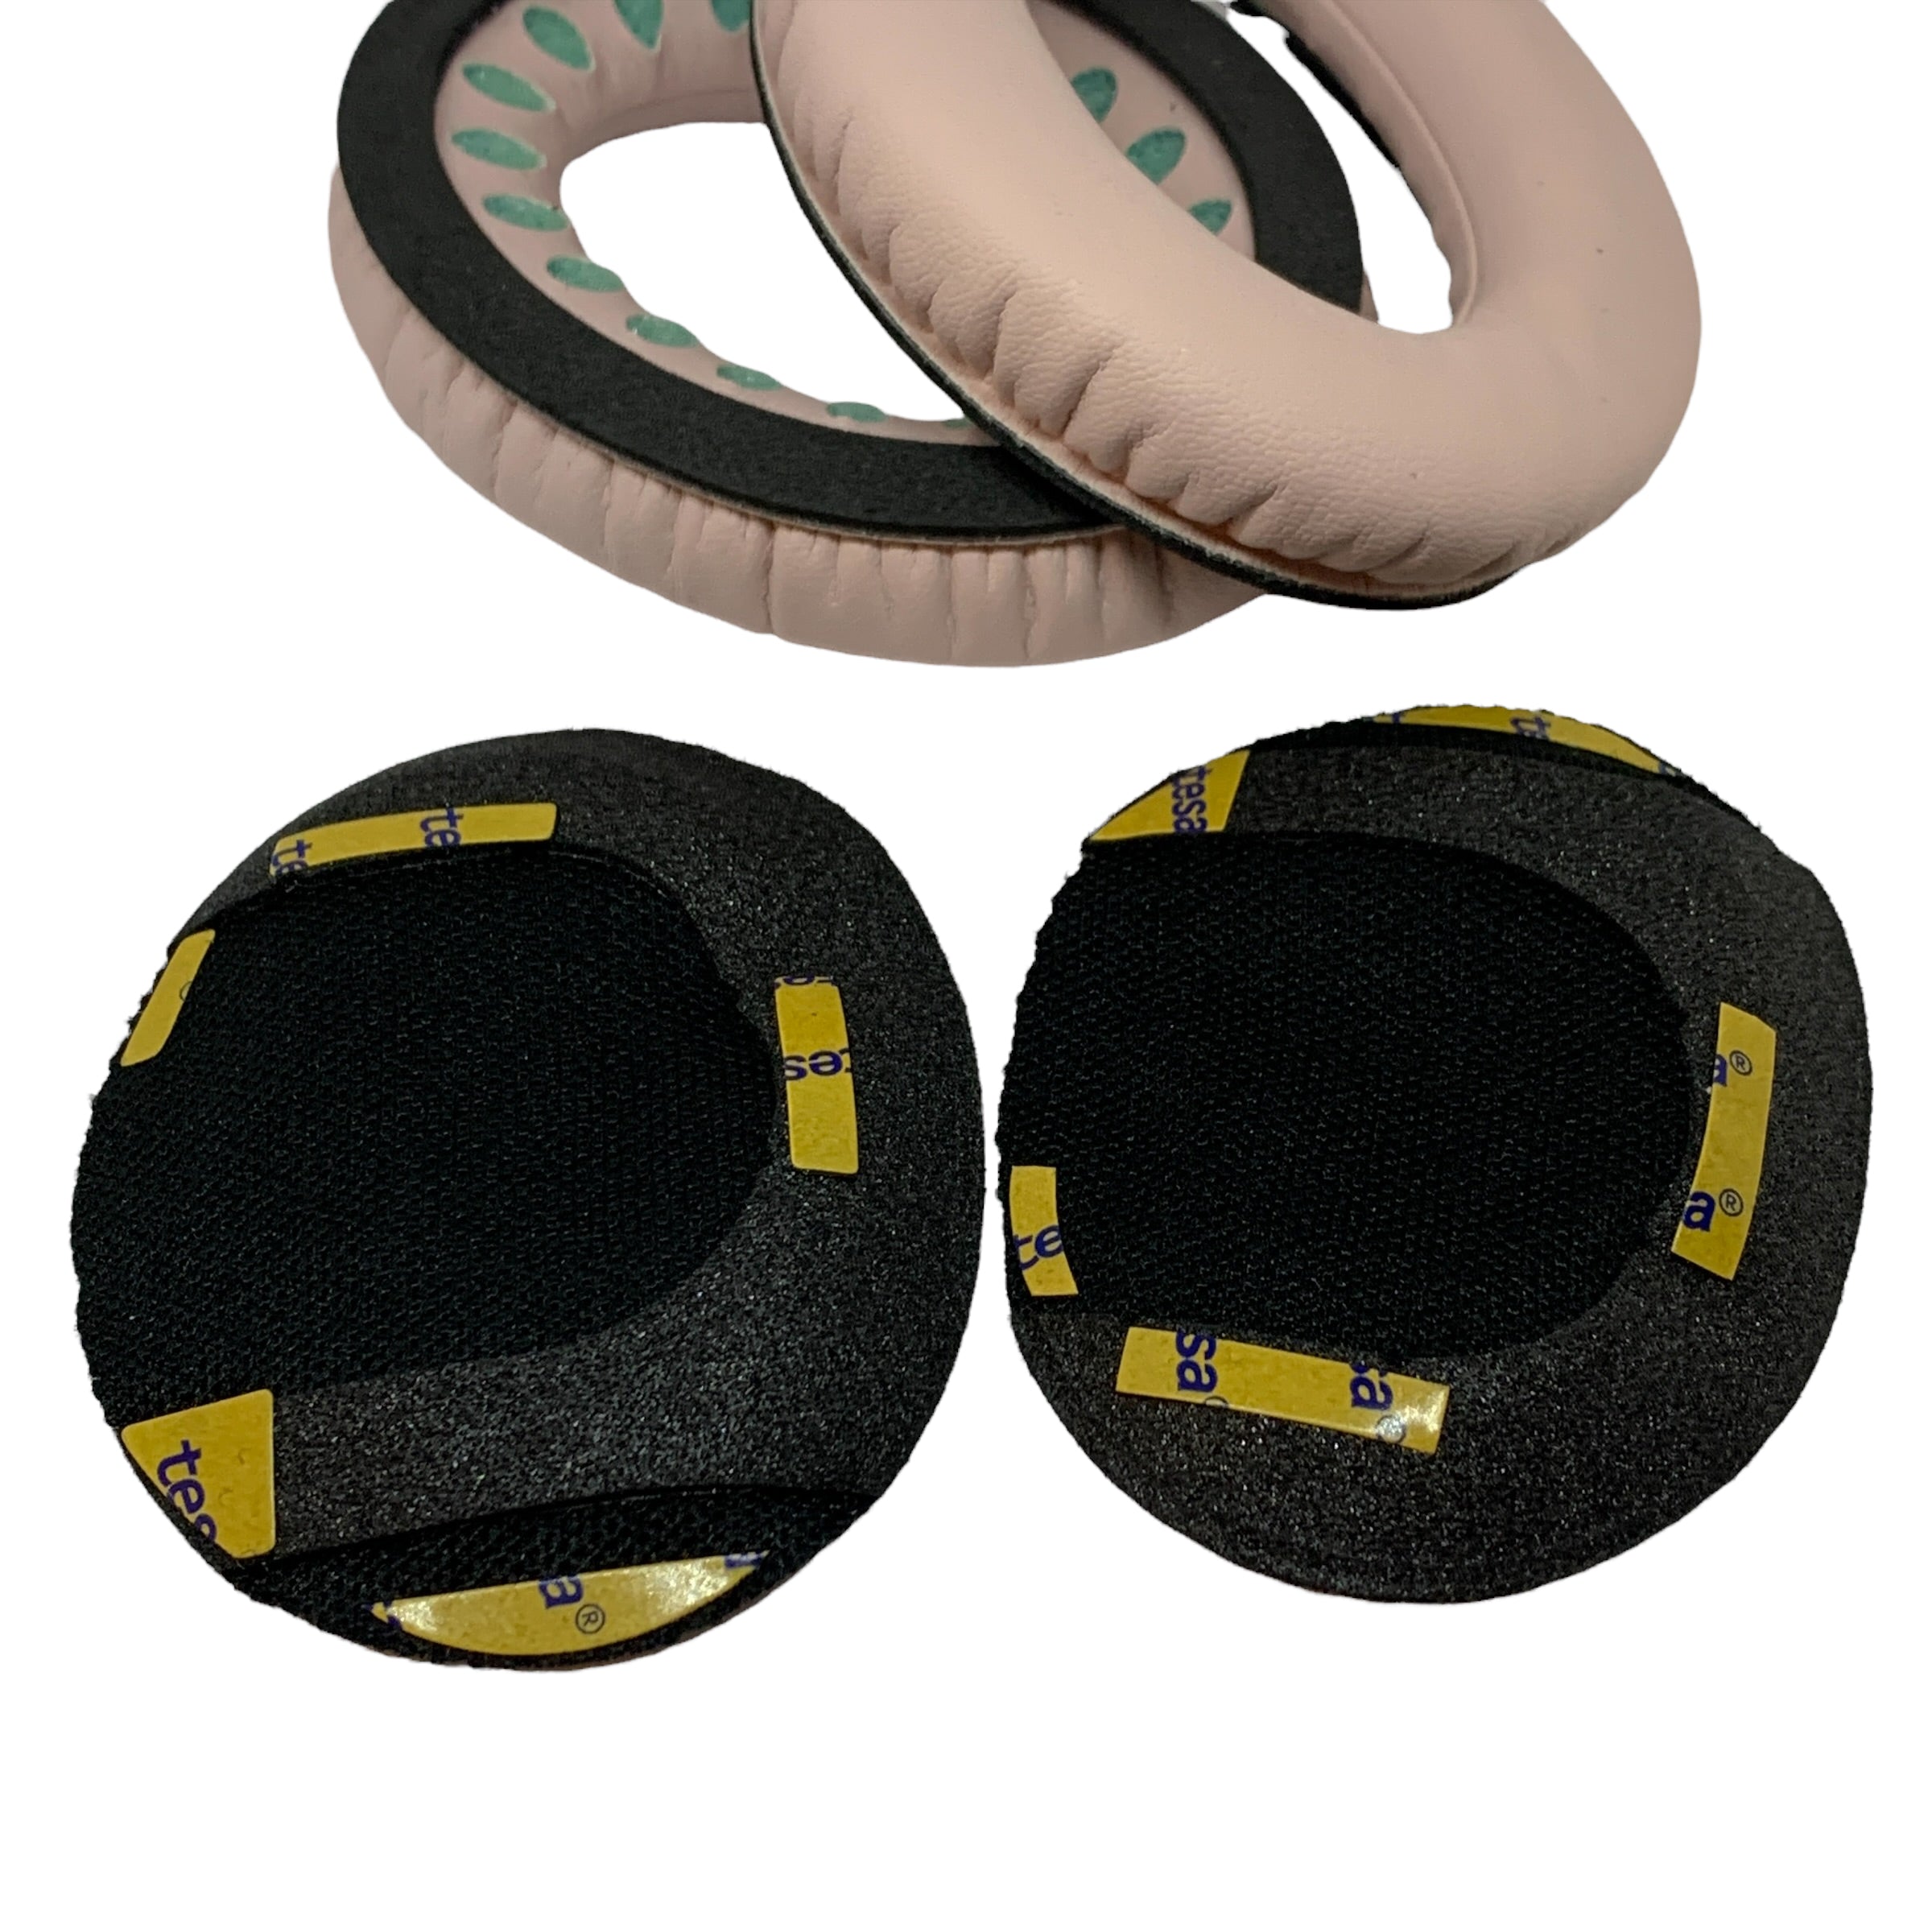 CentralSound Memory Foam Ear Pad Cushions for Bose QuietComfort 45 QC45 Headphones - CentralSound